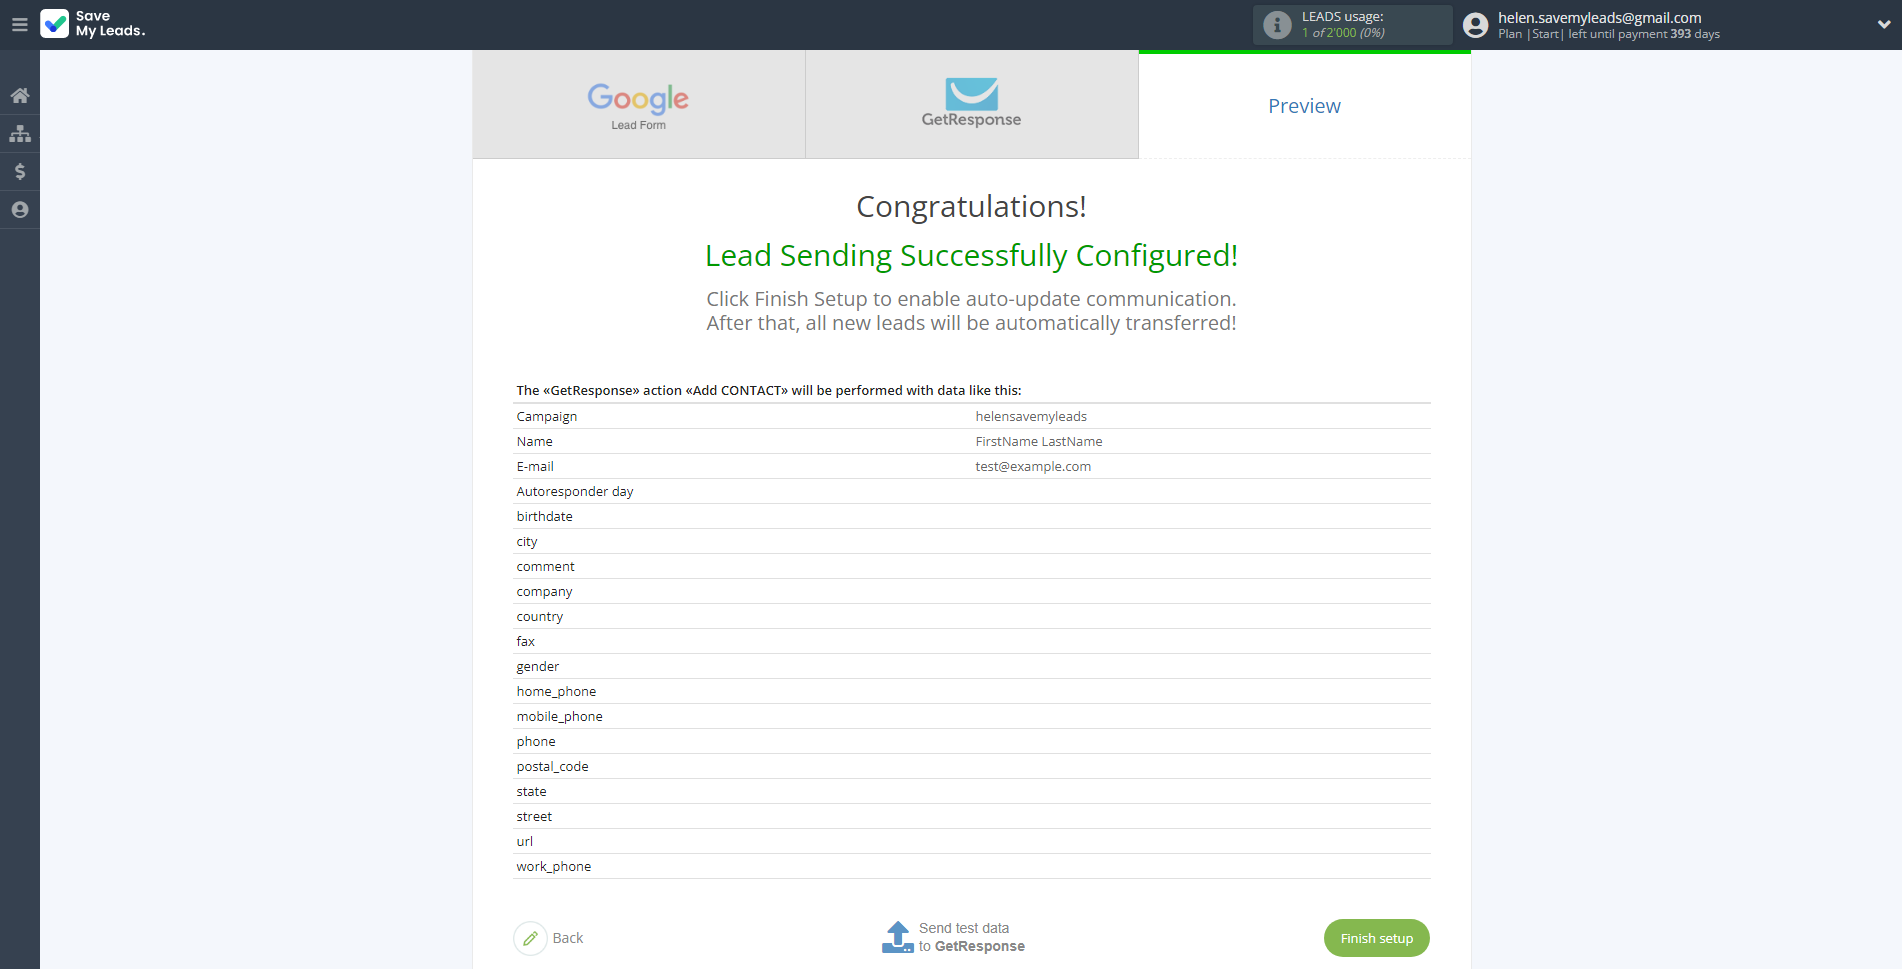 How to Connect Google Lead Form with GetResponse | Test data